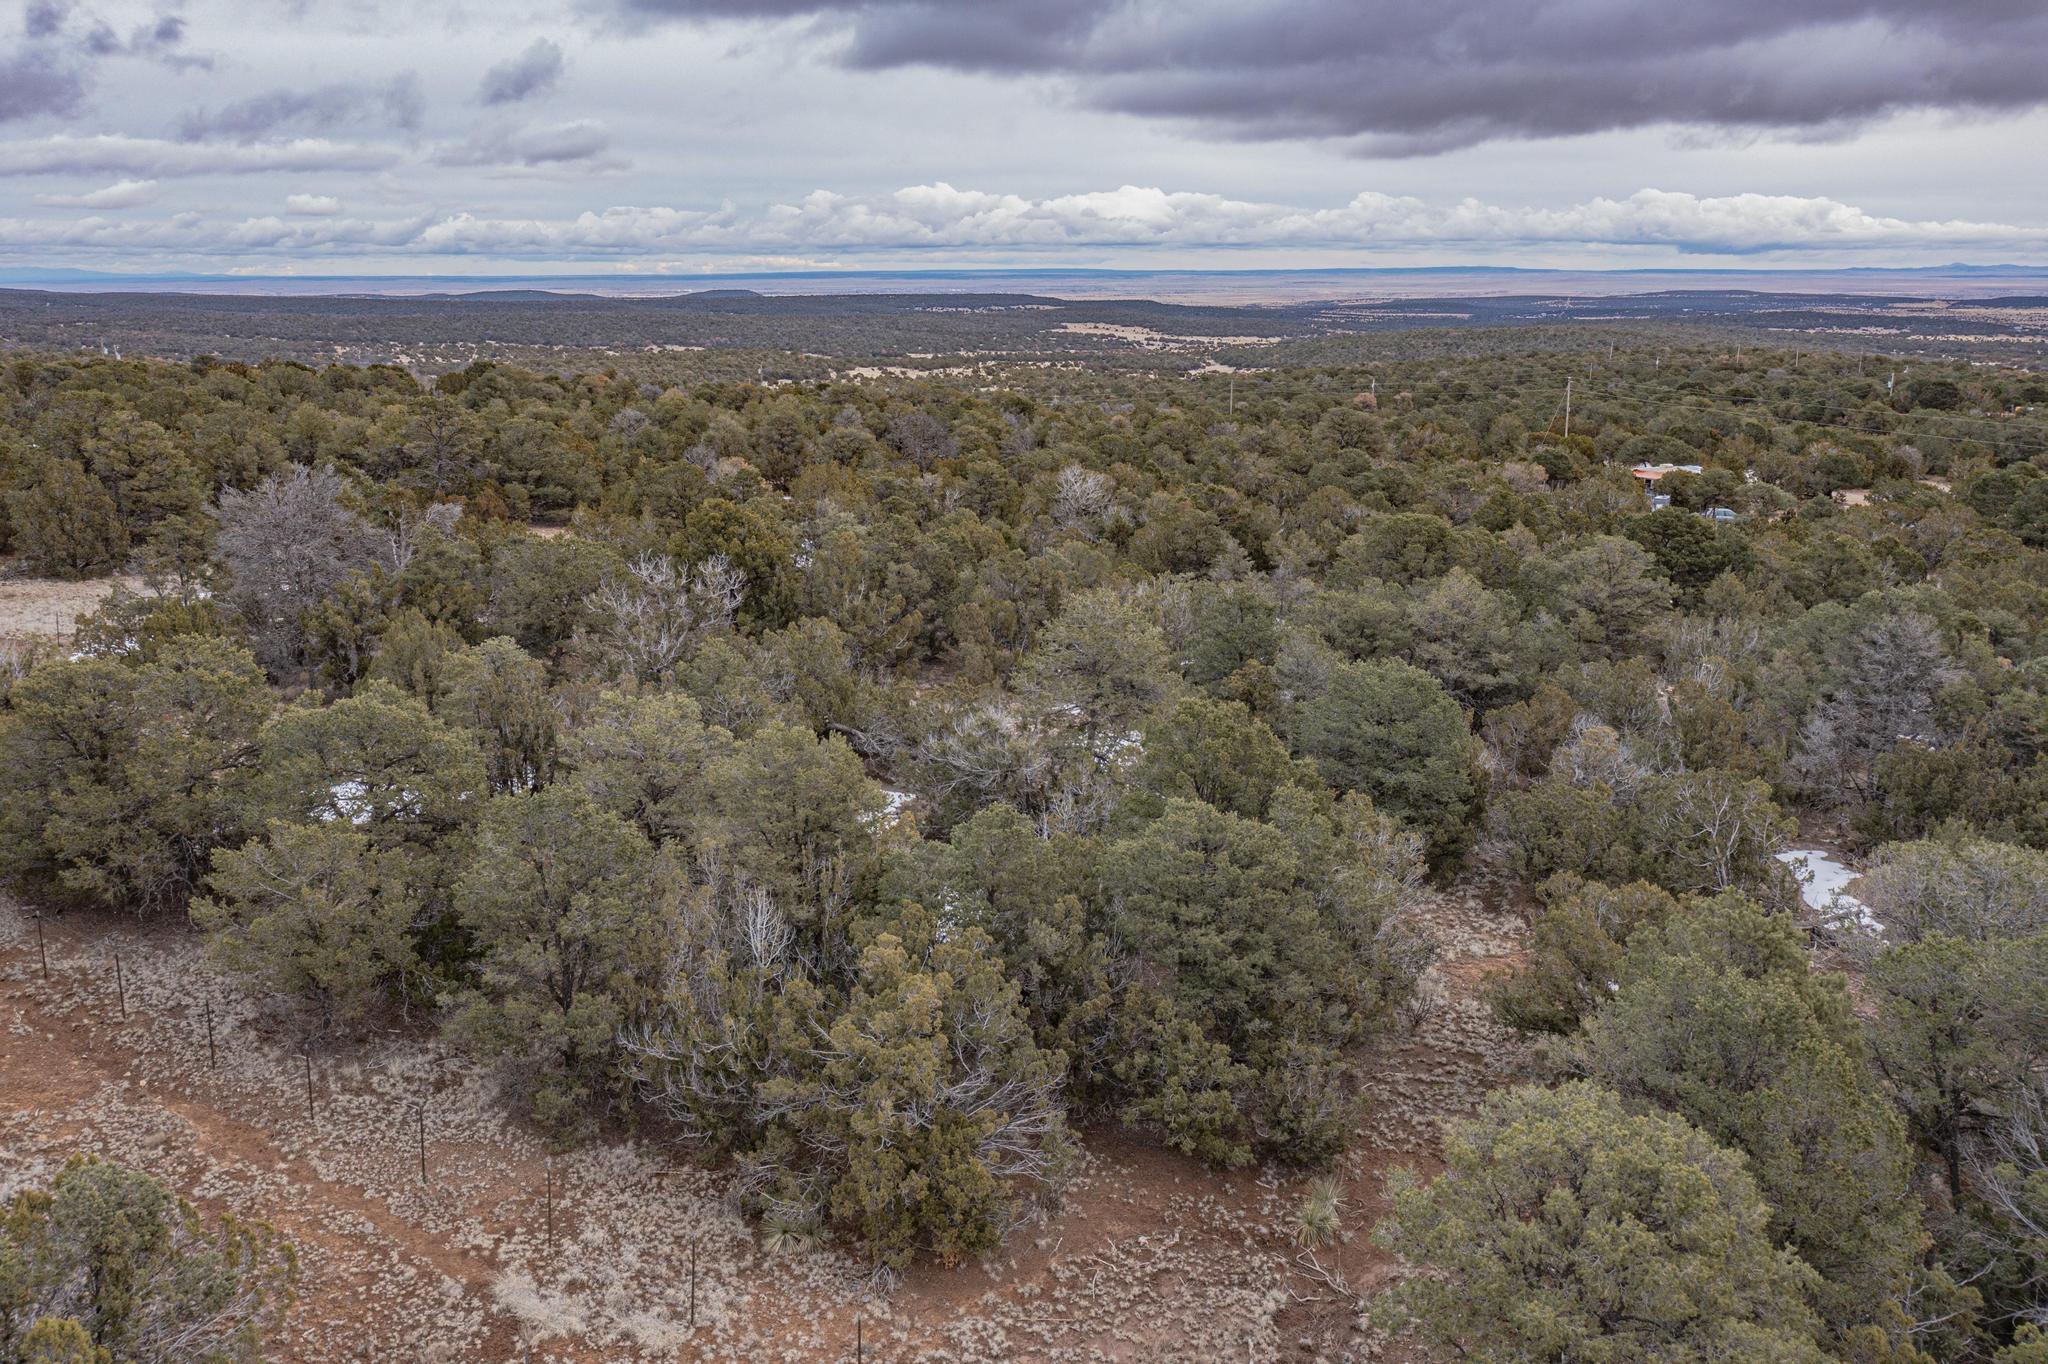 6 Doc Holiday Road, Edgewood, New Mexico 87015, ,Land,For Sale,6 Doc Holiday Road,1055615